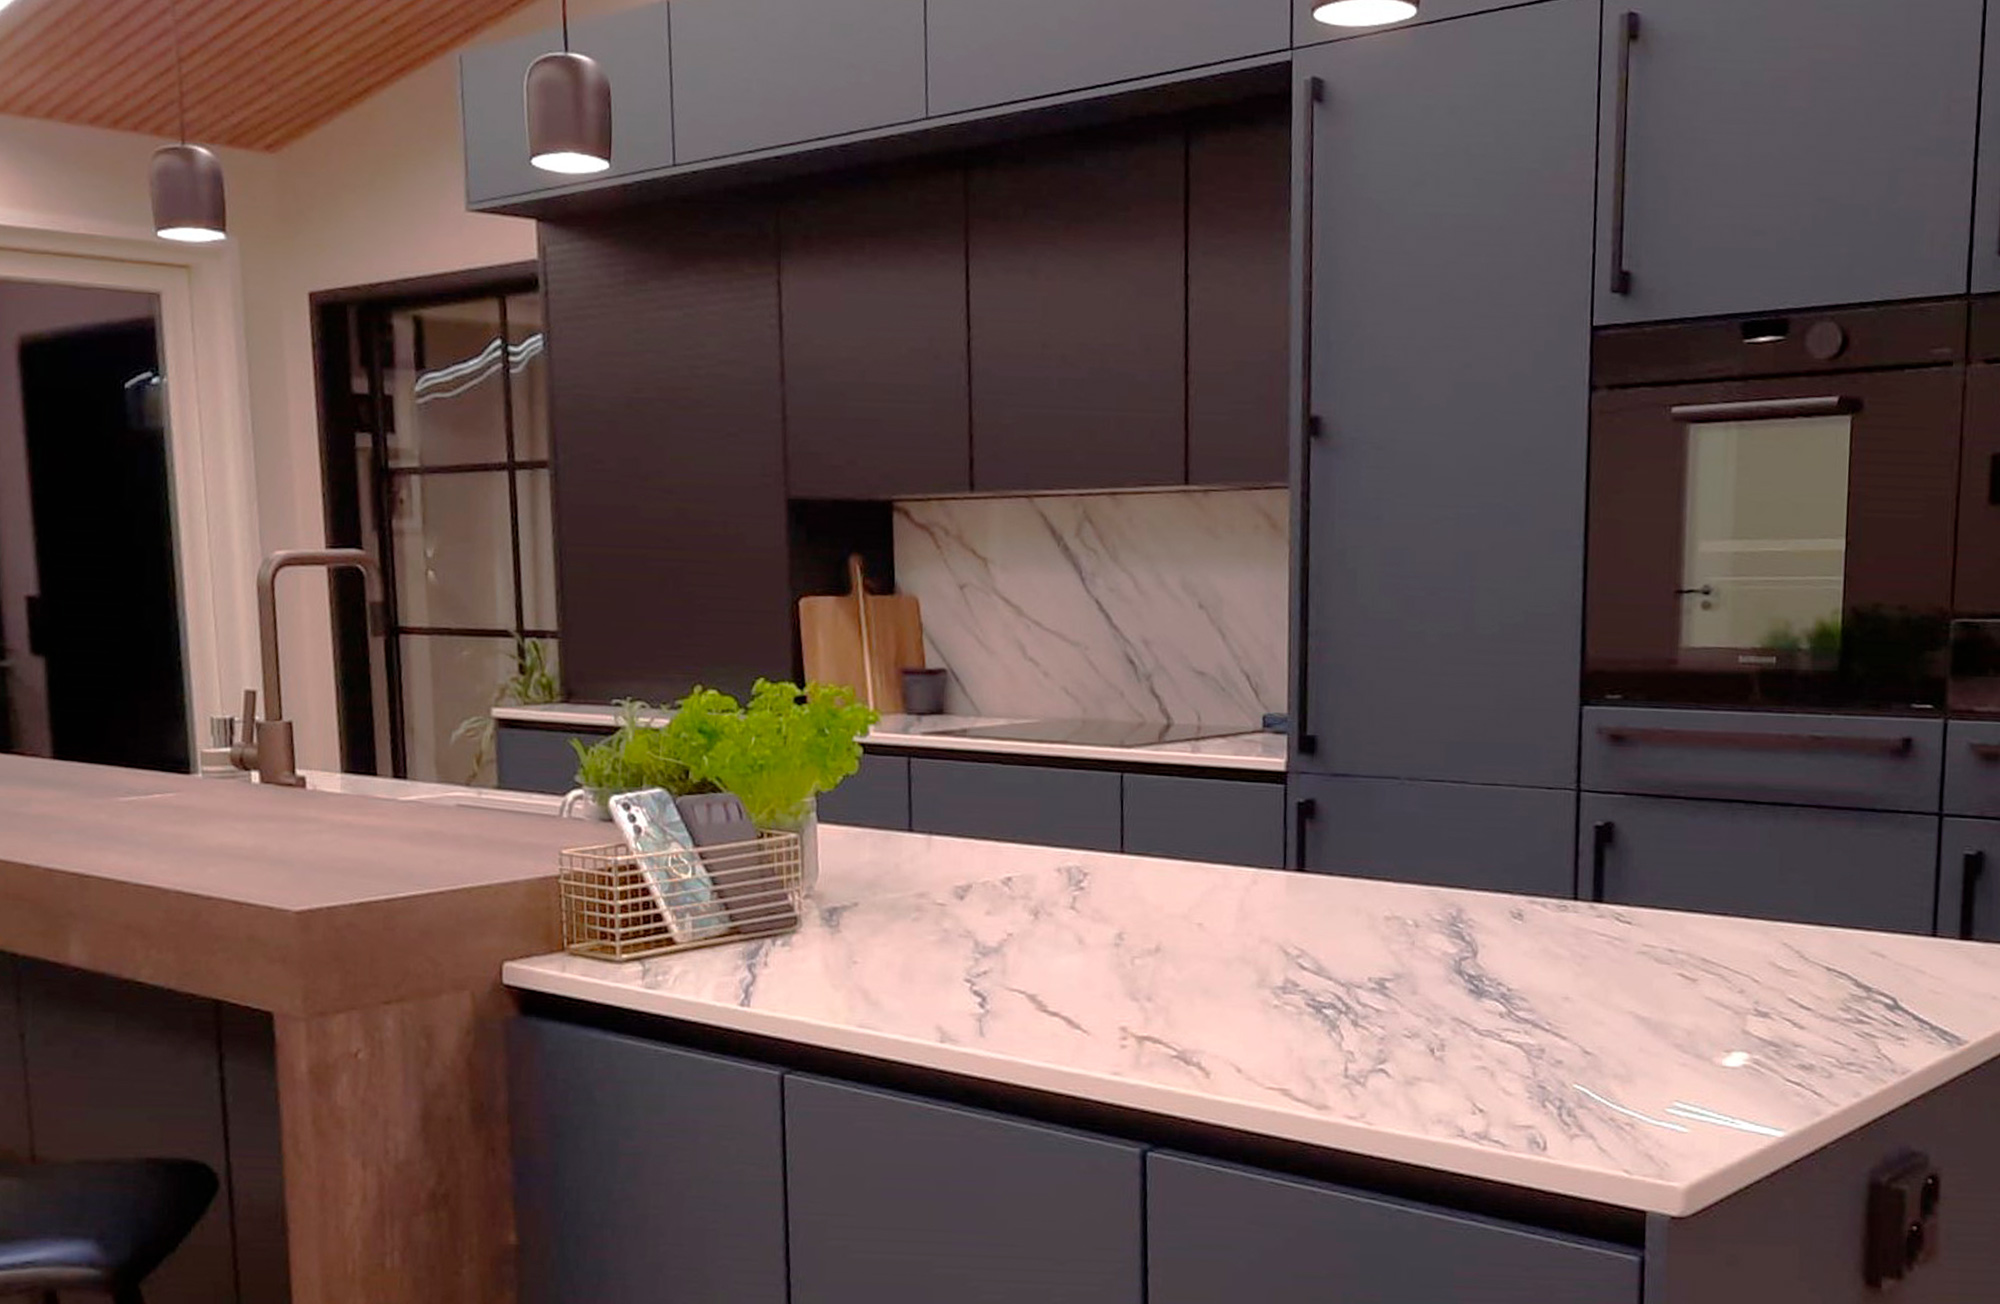 Image of Saana Mantere 1 1 in An ultra-resistant delicate kitchen - Cosentino